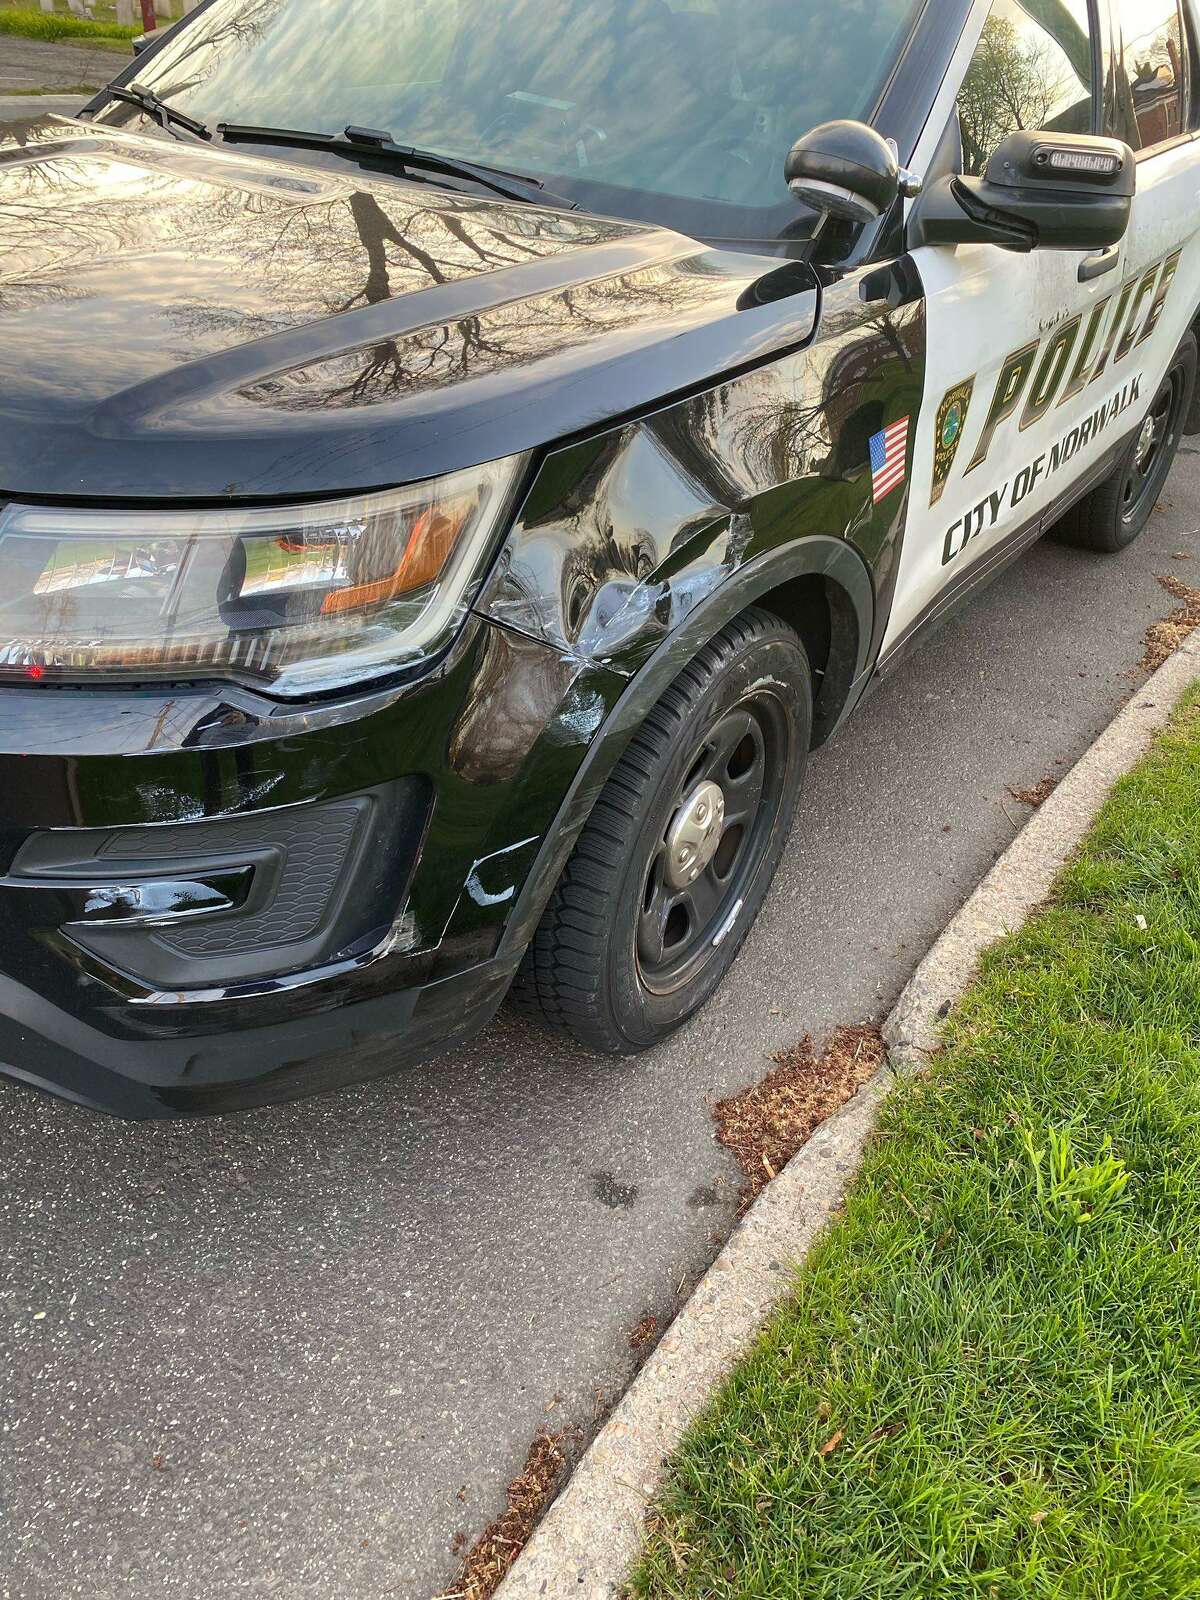 Authorities said officers were investigating a crash near the Norwalk Green in Norwalk, Conn., on Wednesday, April 20, 2022, when two cruisers were struck by another vehicle.